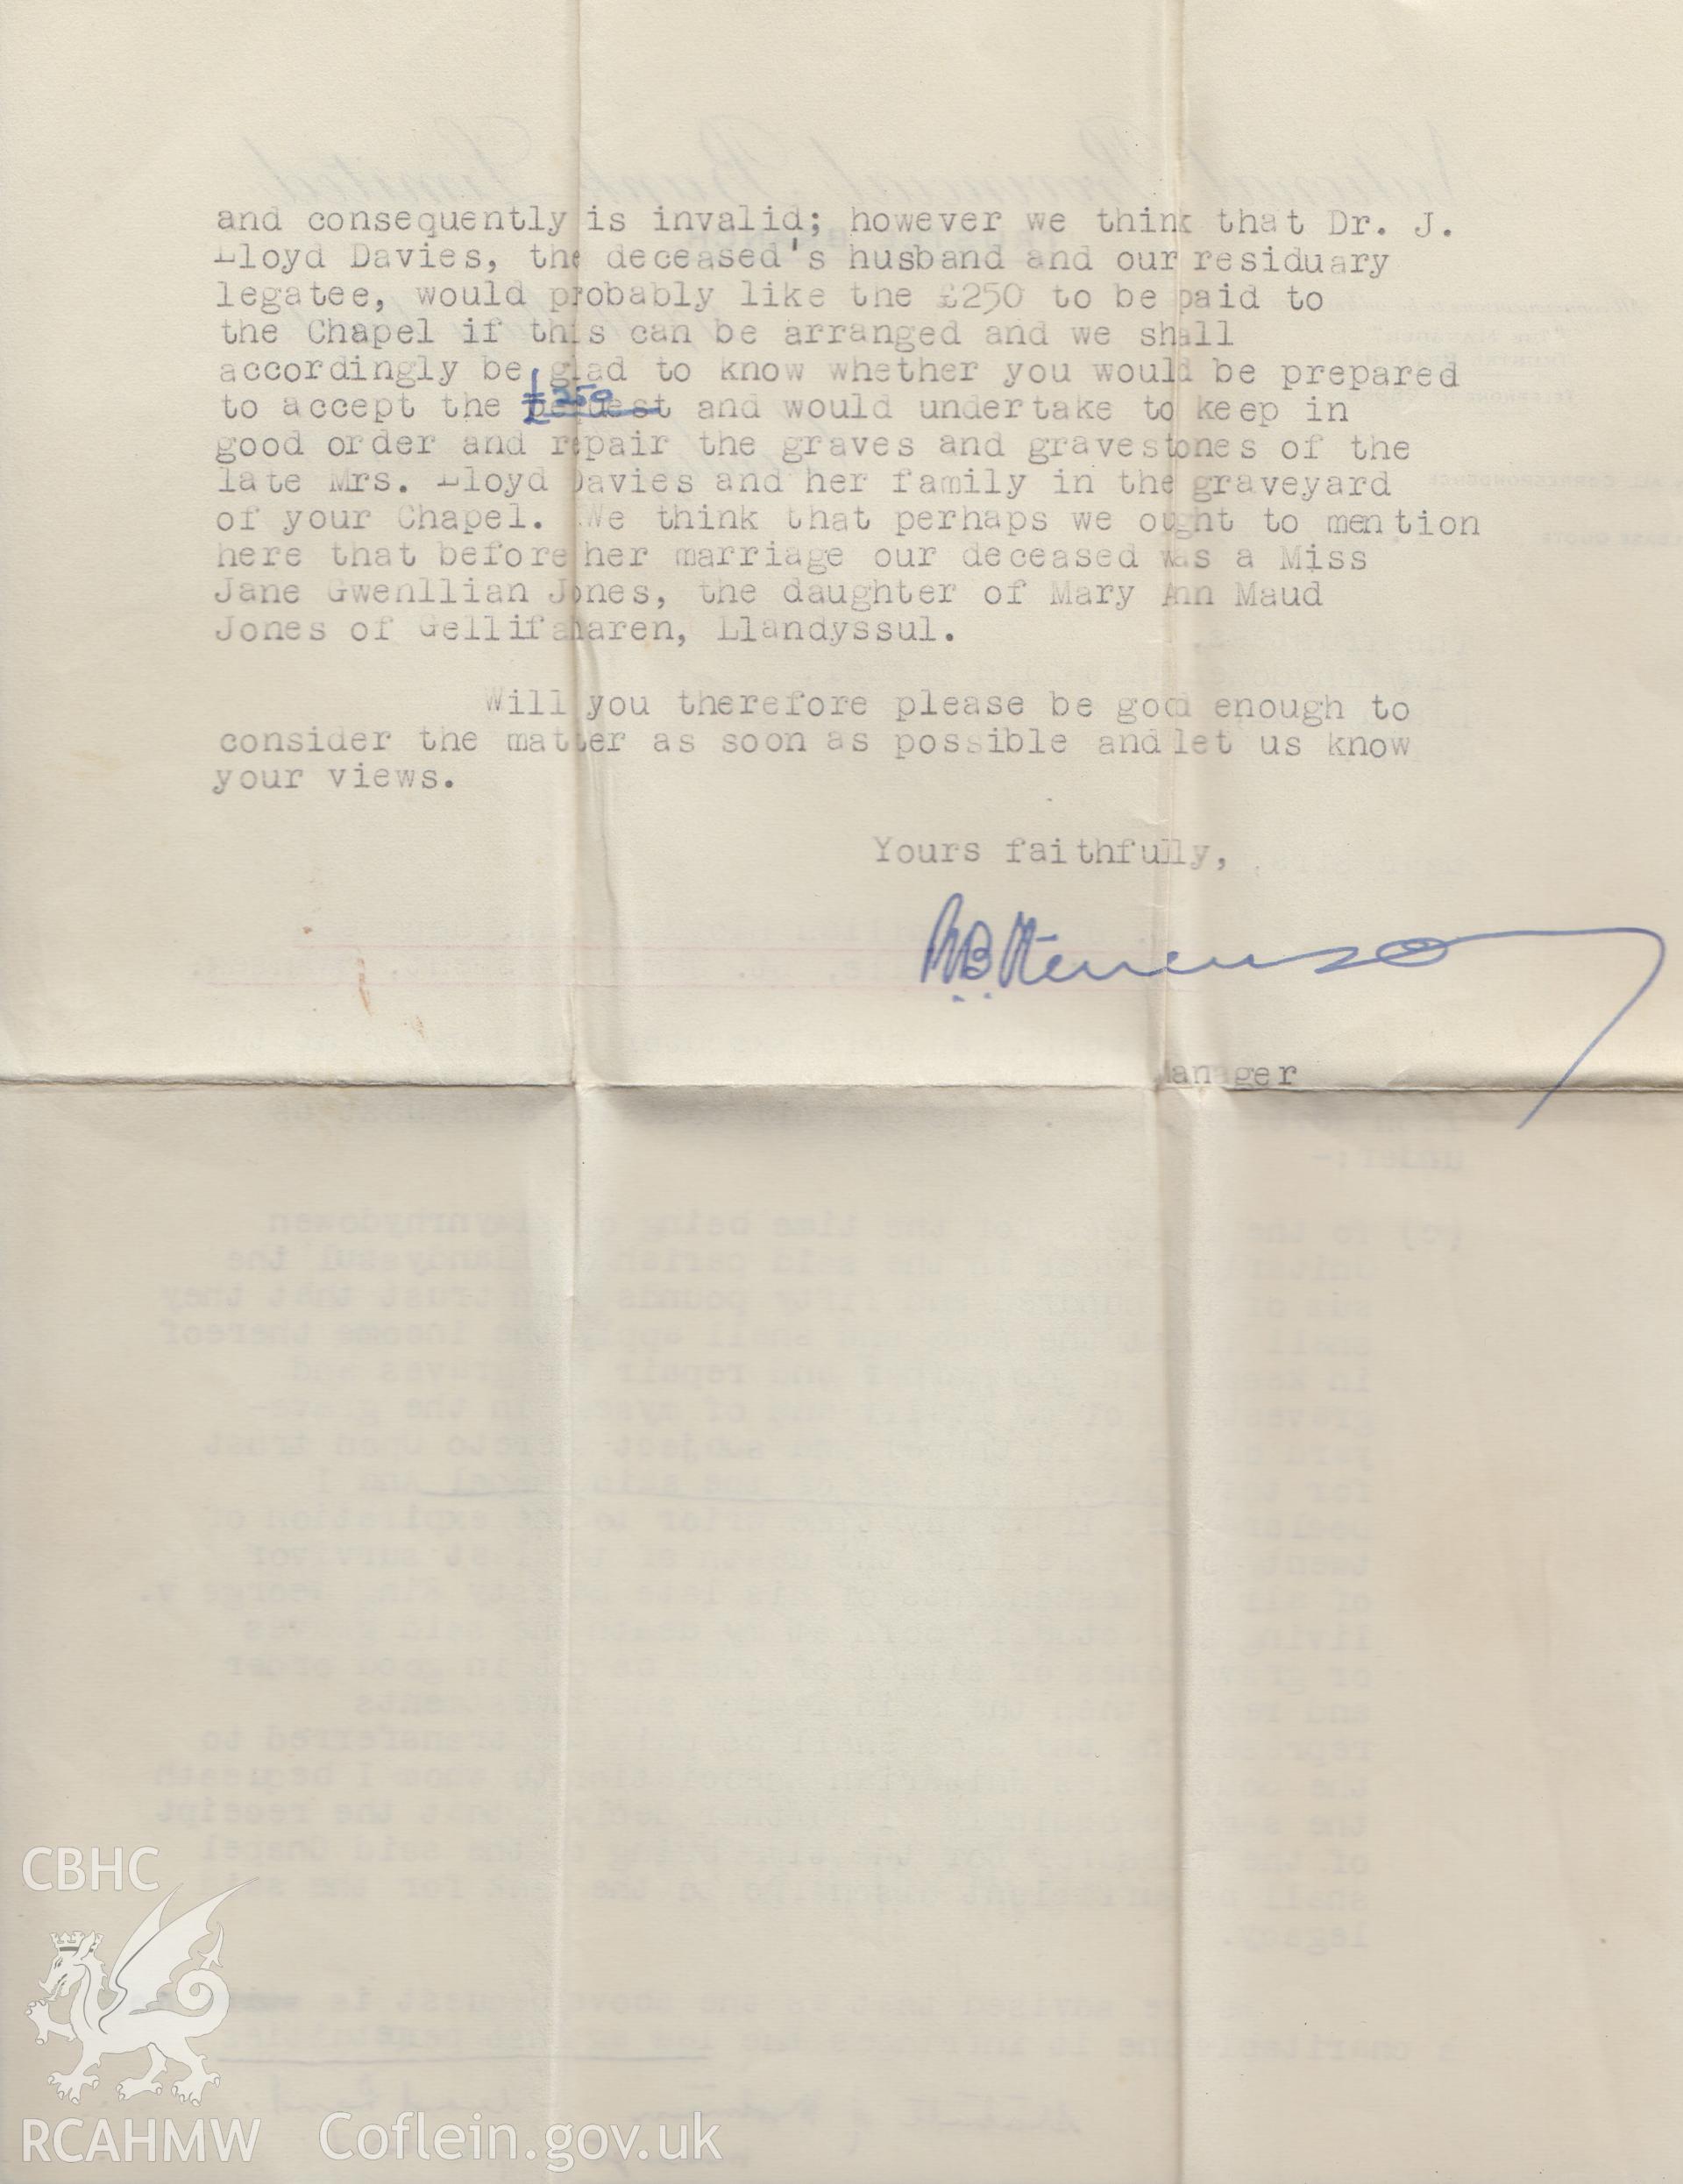 Typed letter regarding bequest from Jane Gwenllian Lloyd Davies to Llwynrhydowen for keeping in order graves at Llwynrhydowen chapel. Donated to the RCAHMW during the Digital Dissent Project.